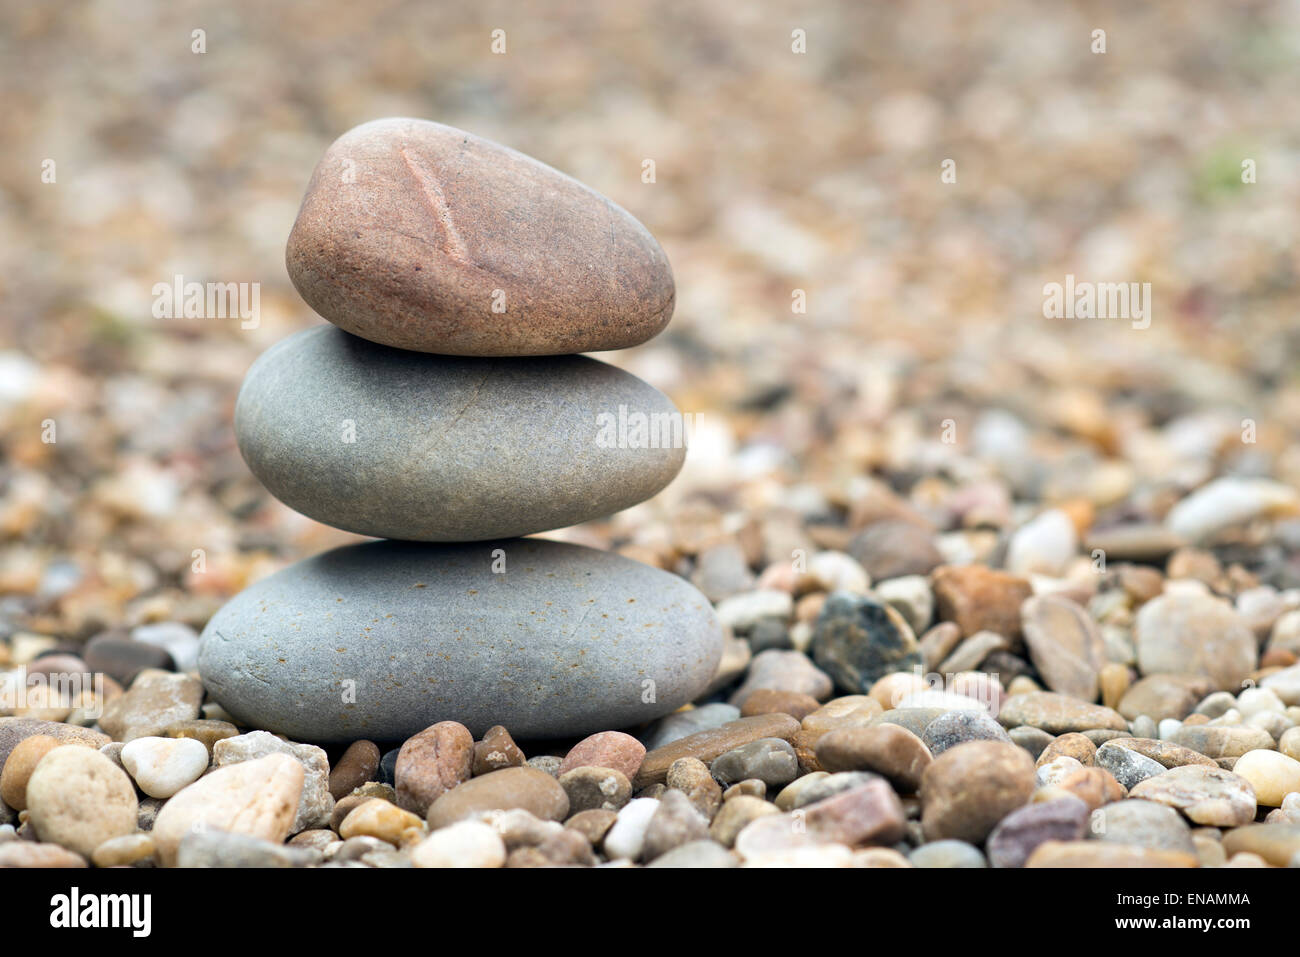 Stack of pebbles on a floor of gravel Stock Photo